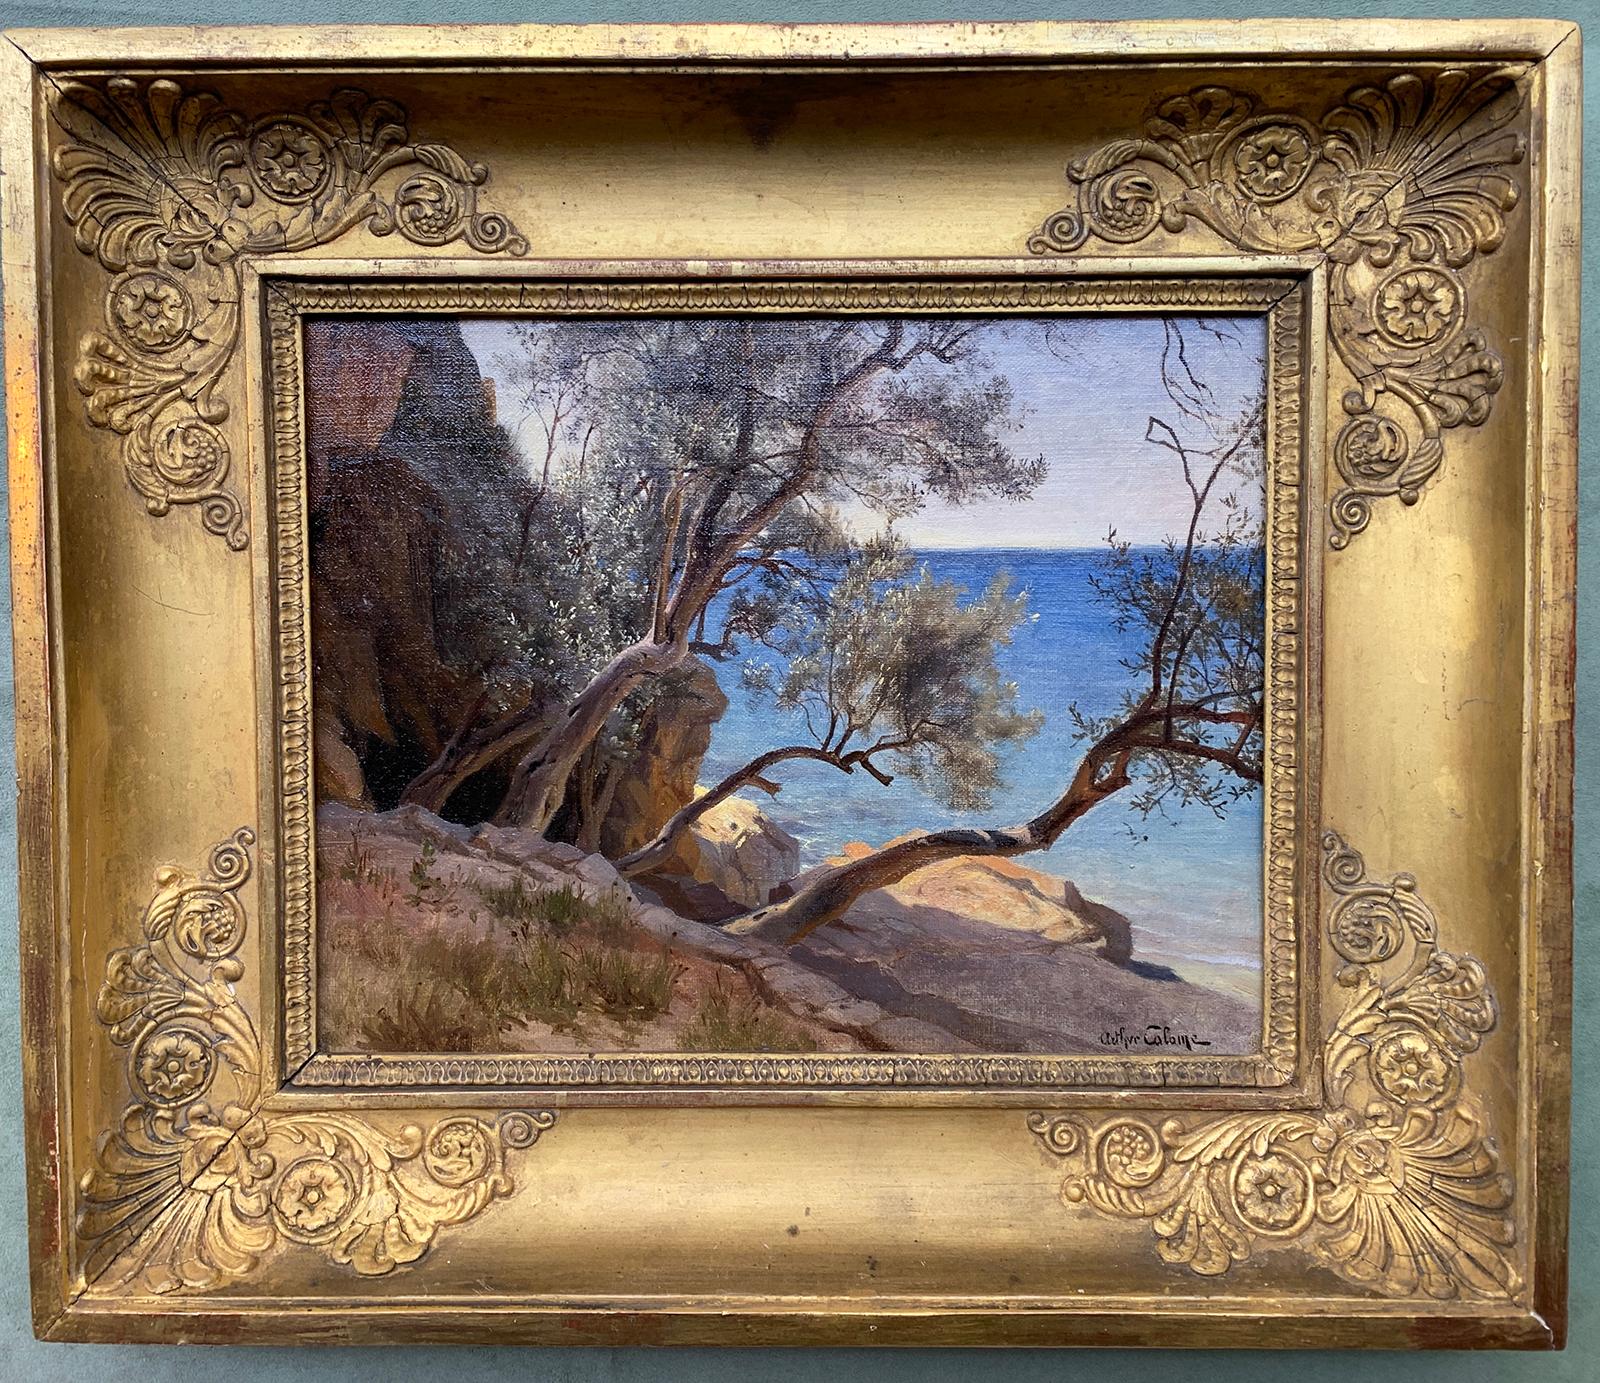 Jean-Baptiste-Arthur CALAME
(Geneva, 1843 - Geneva, 1919)
Mediterranean shore, probably the Côte d'Azur
Oil on canvas mounted on cardboard
H. 24 cm; L. 30 cm
Signed lower right
Circa 1875

In Arthur Calame's landscapes, we recognize both the